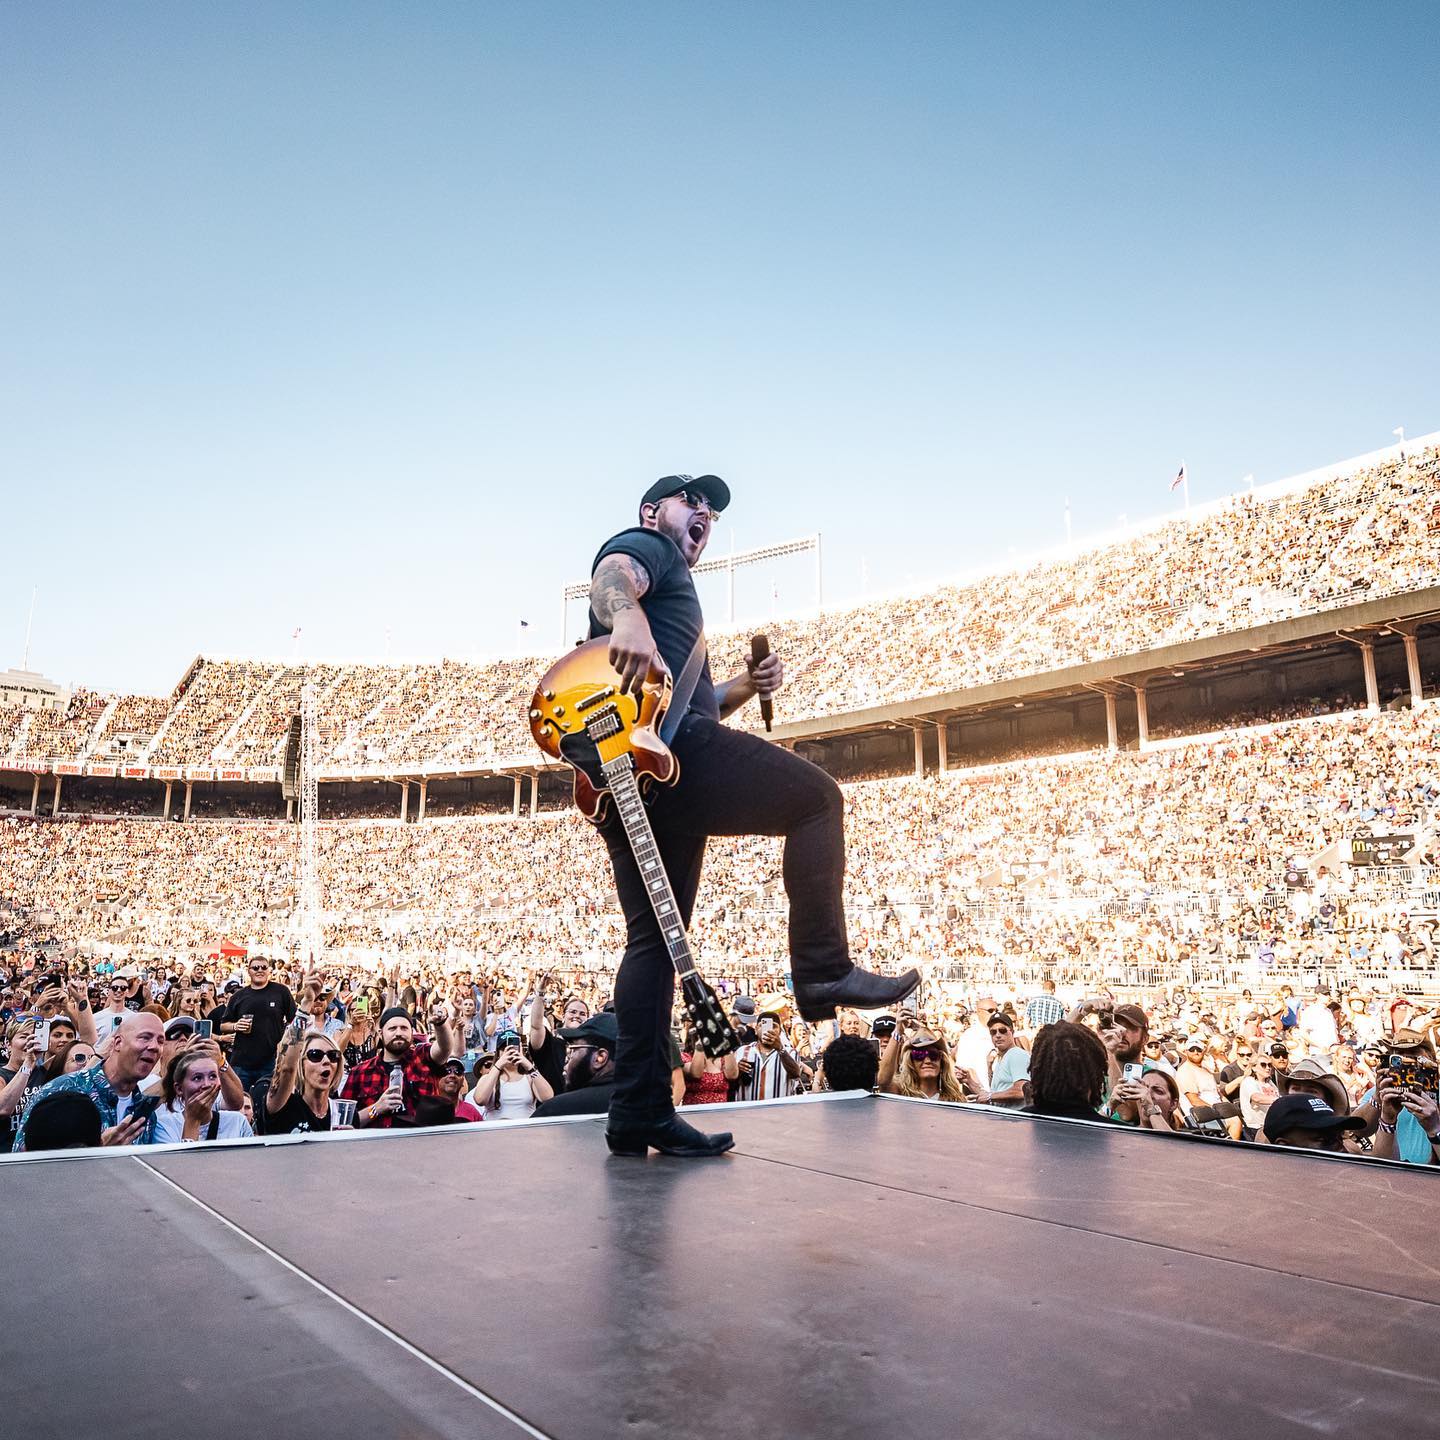 Country musician Kameron Marlowe performing in front of a packed stadium at the Buckeye Country Superfest. Photo by Instagram user @buckeyecountrysuperfest